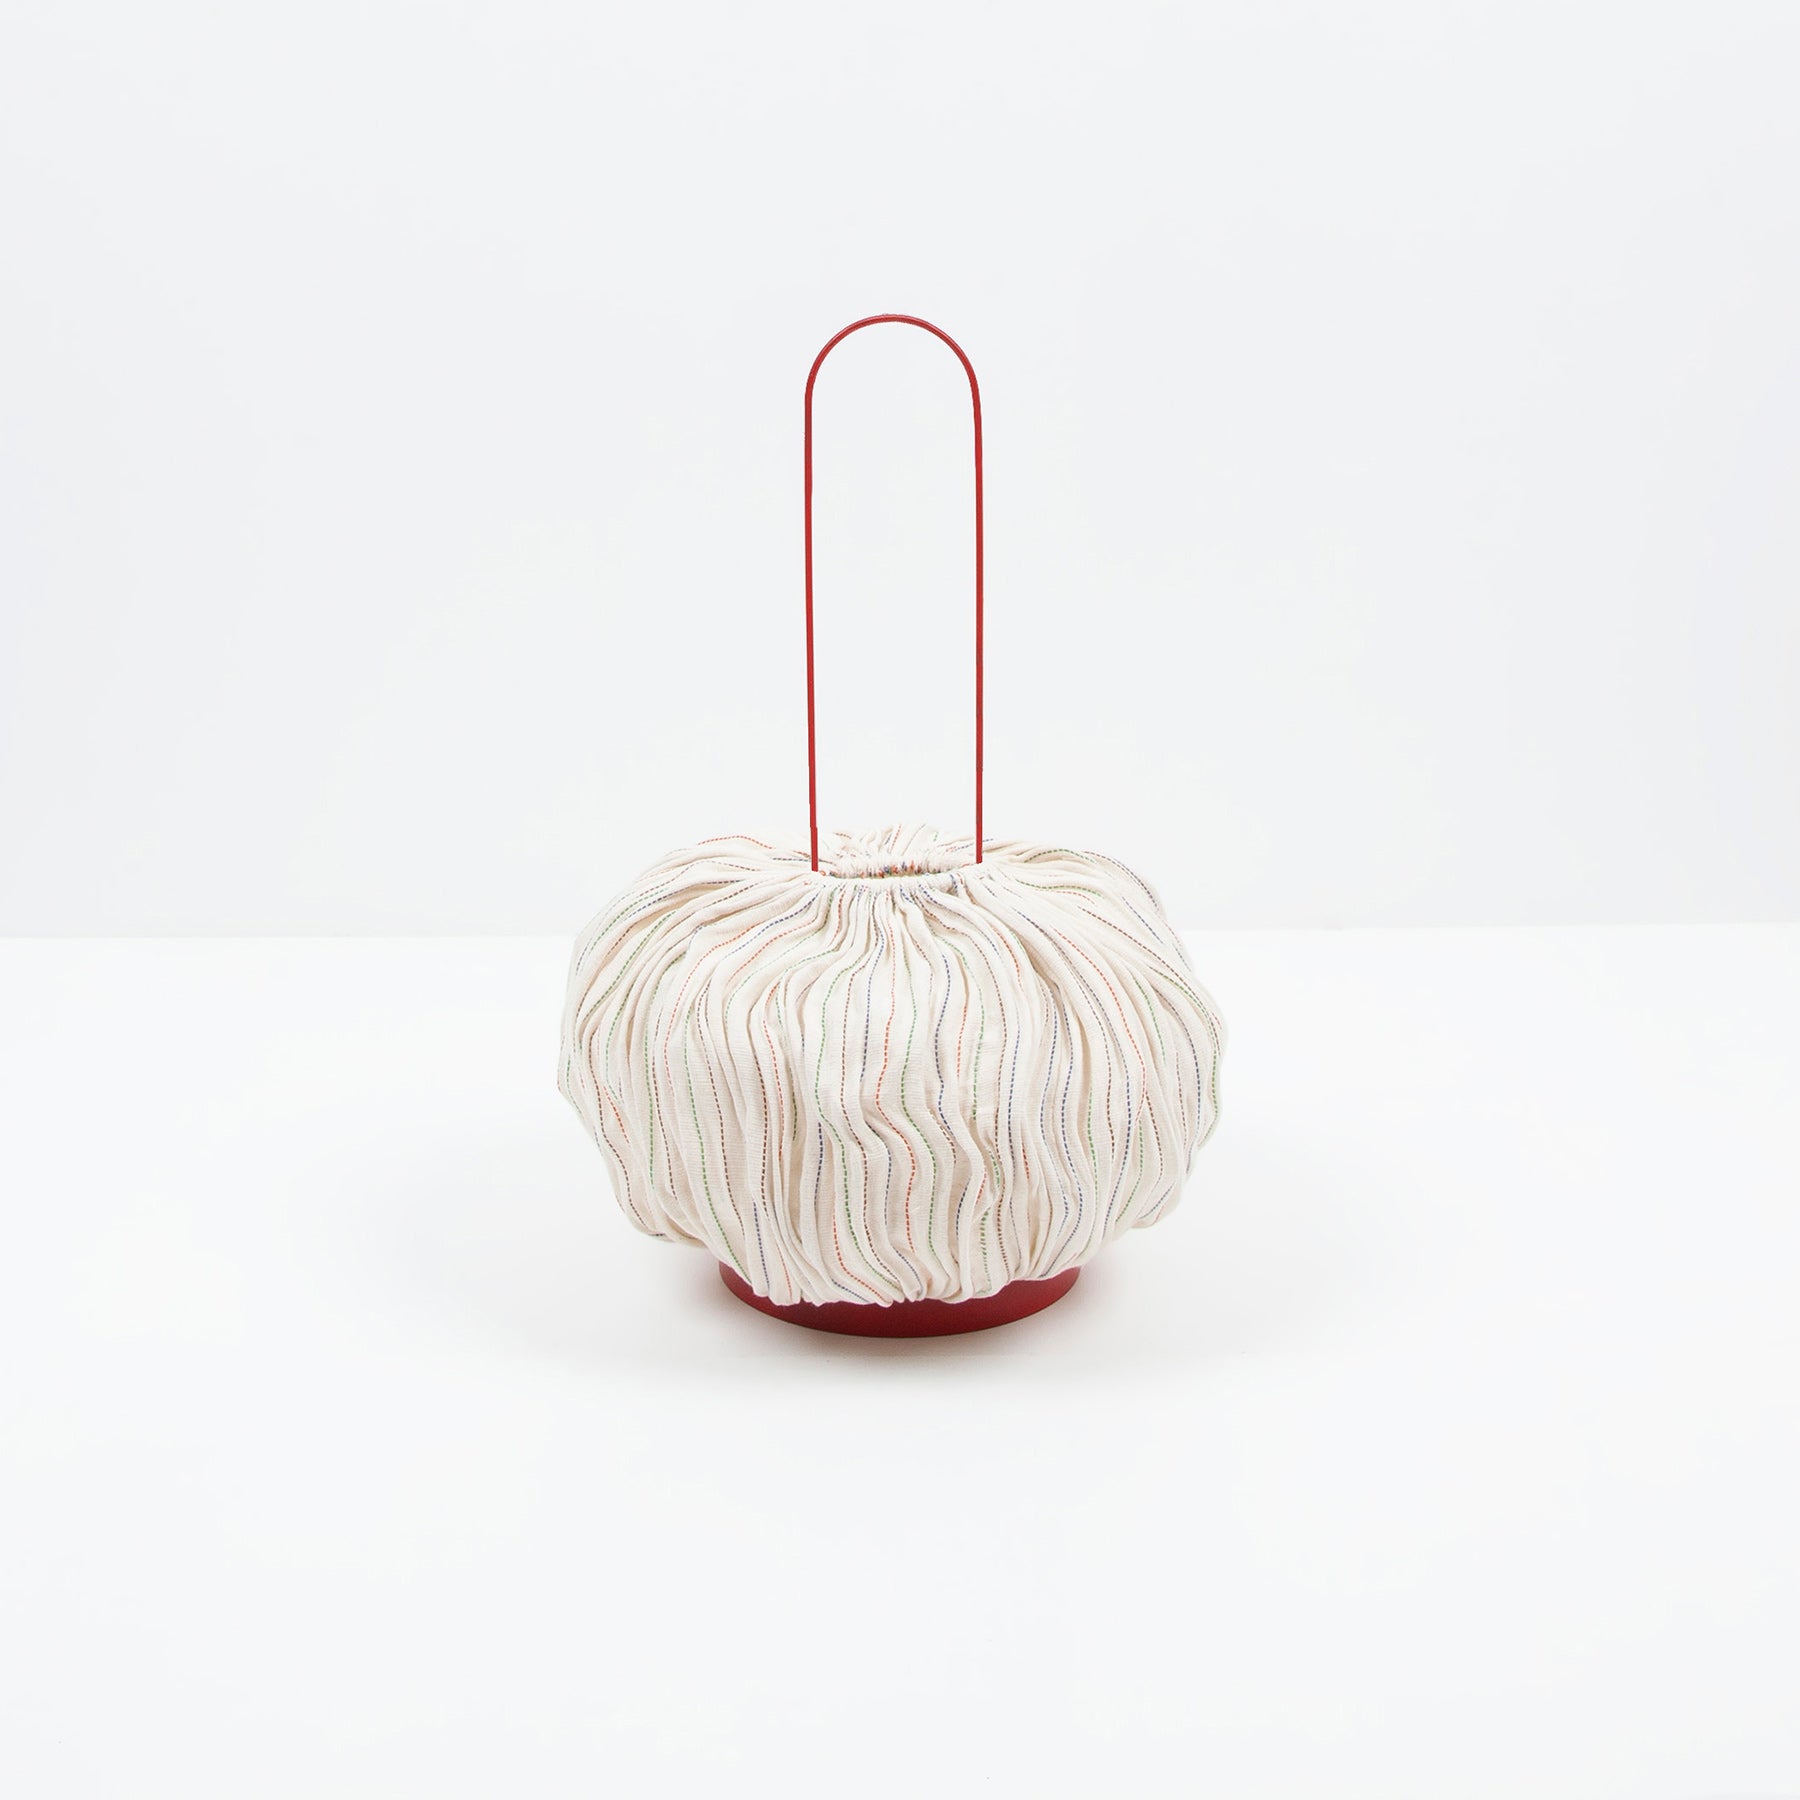 NEBULE lamps | handwoven with colorful recycled telephone wires